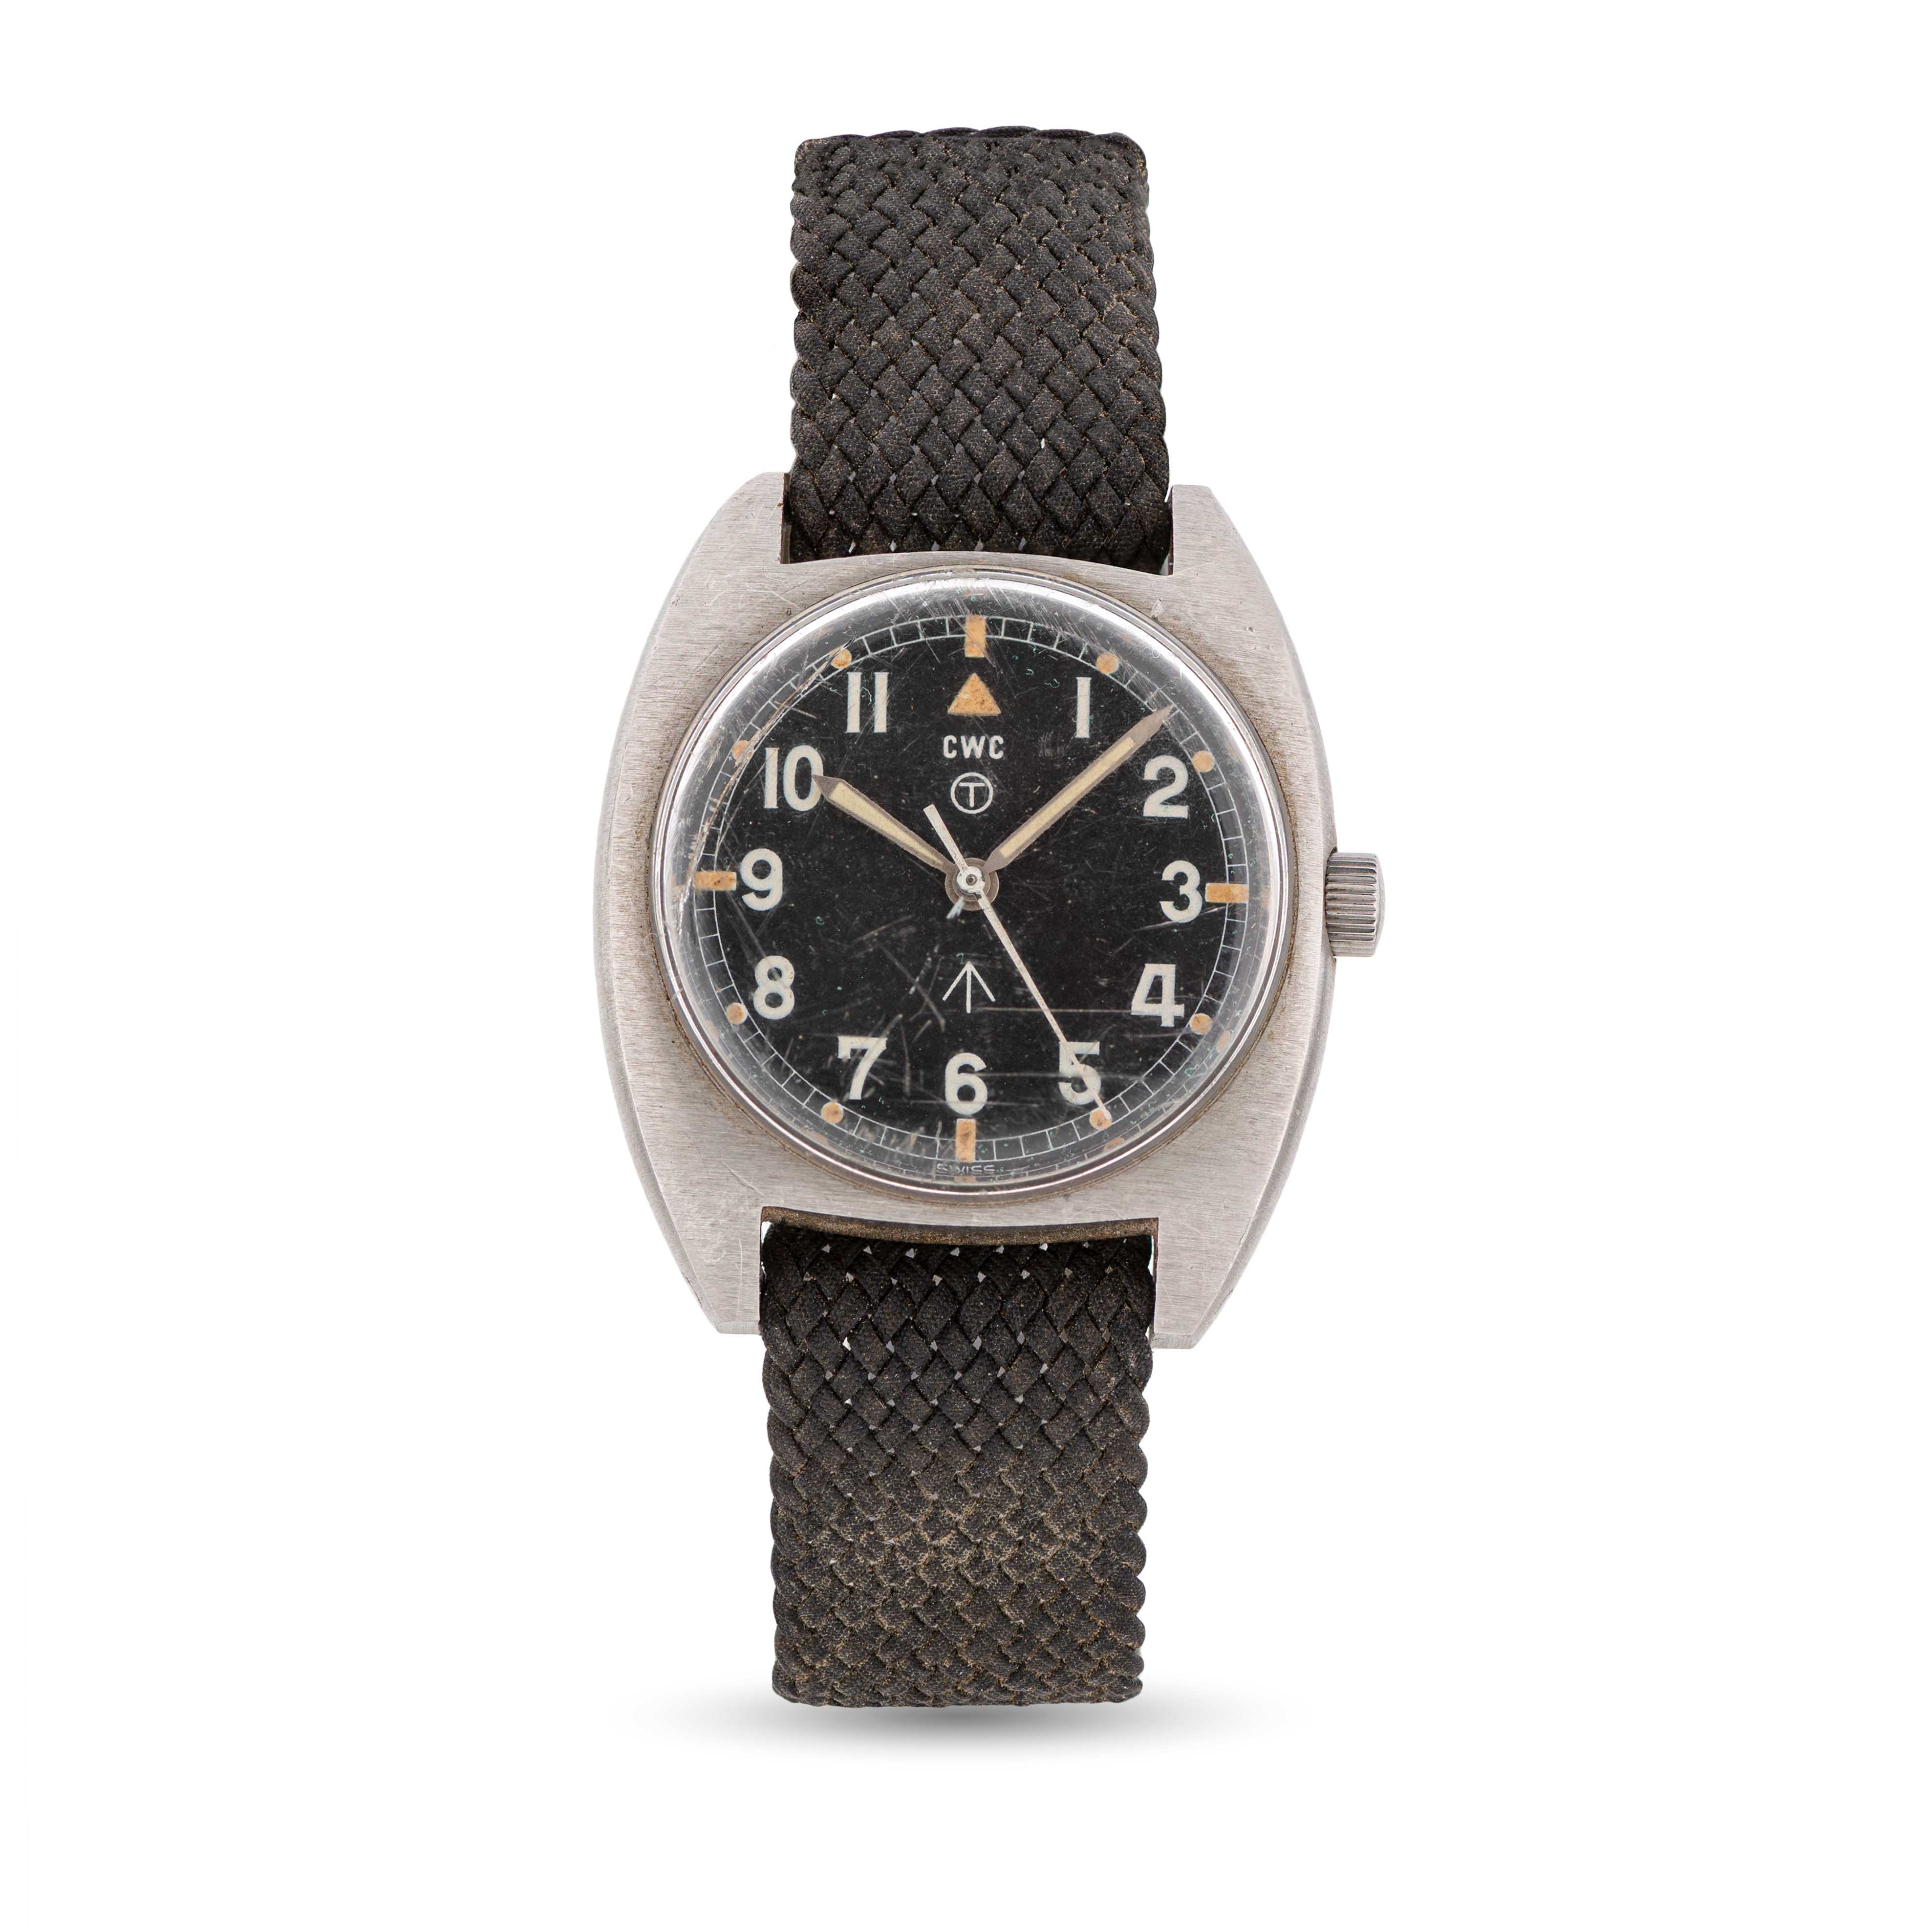 A GENTLEMAN'S STAINLESS STEEL BRITISH MILITARY CWC WRIST WATCH DATED 1977, ISSUED TO THE ARMY - Image 2 of 8